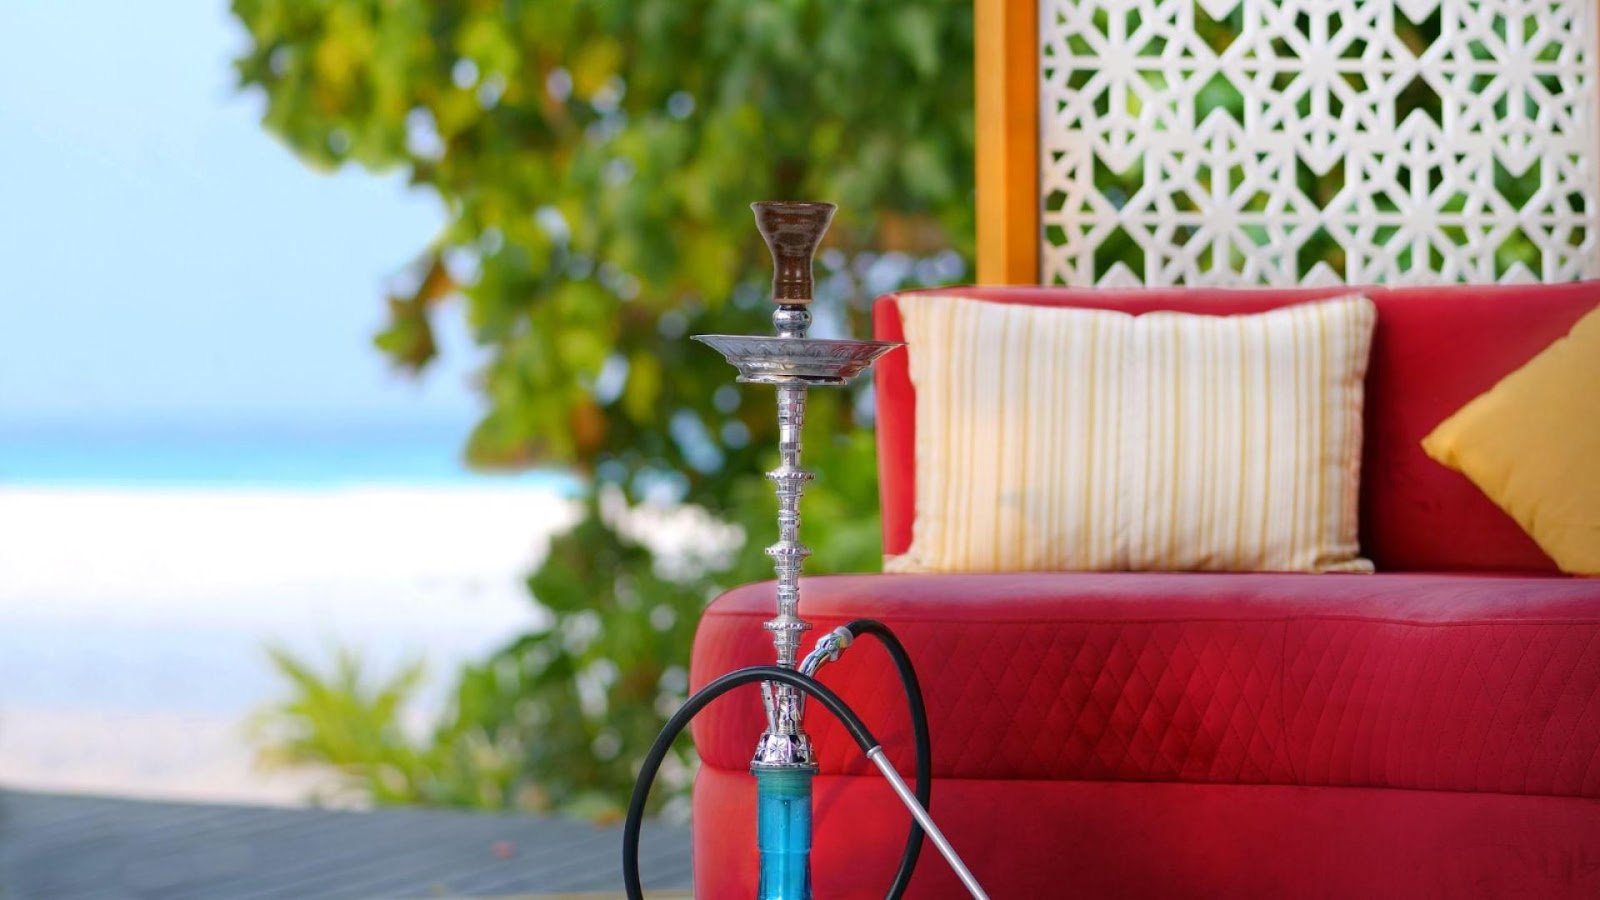 A hookah on a table

Description automatically generated